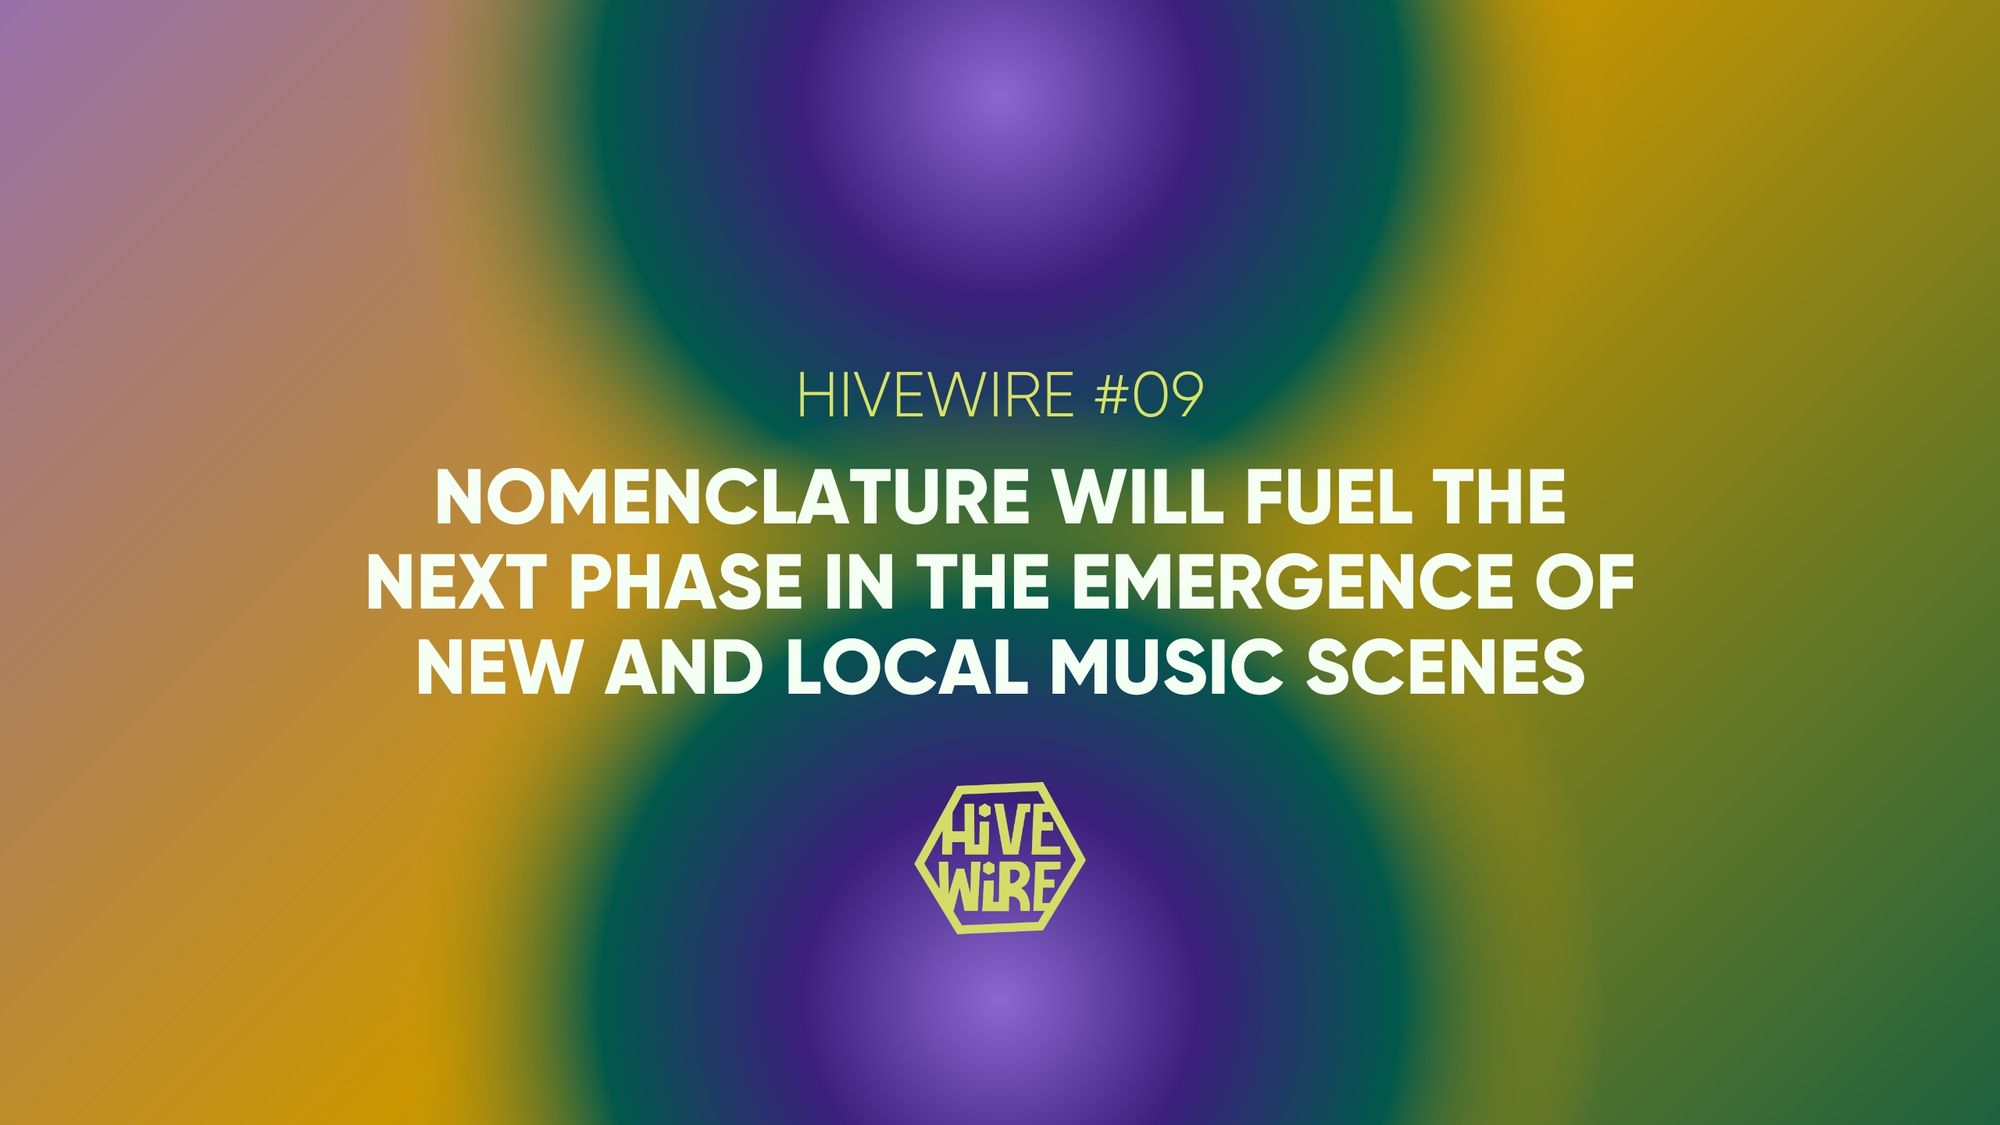 HIVEWIRE #09: Nomenclature will fuel the next phase in the Emergence of New and Local Music Scenes